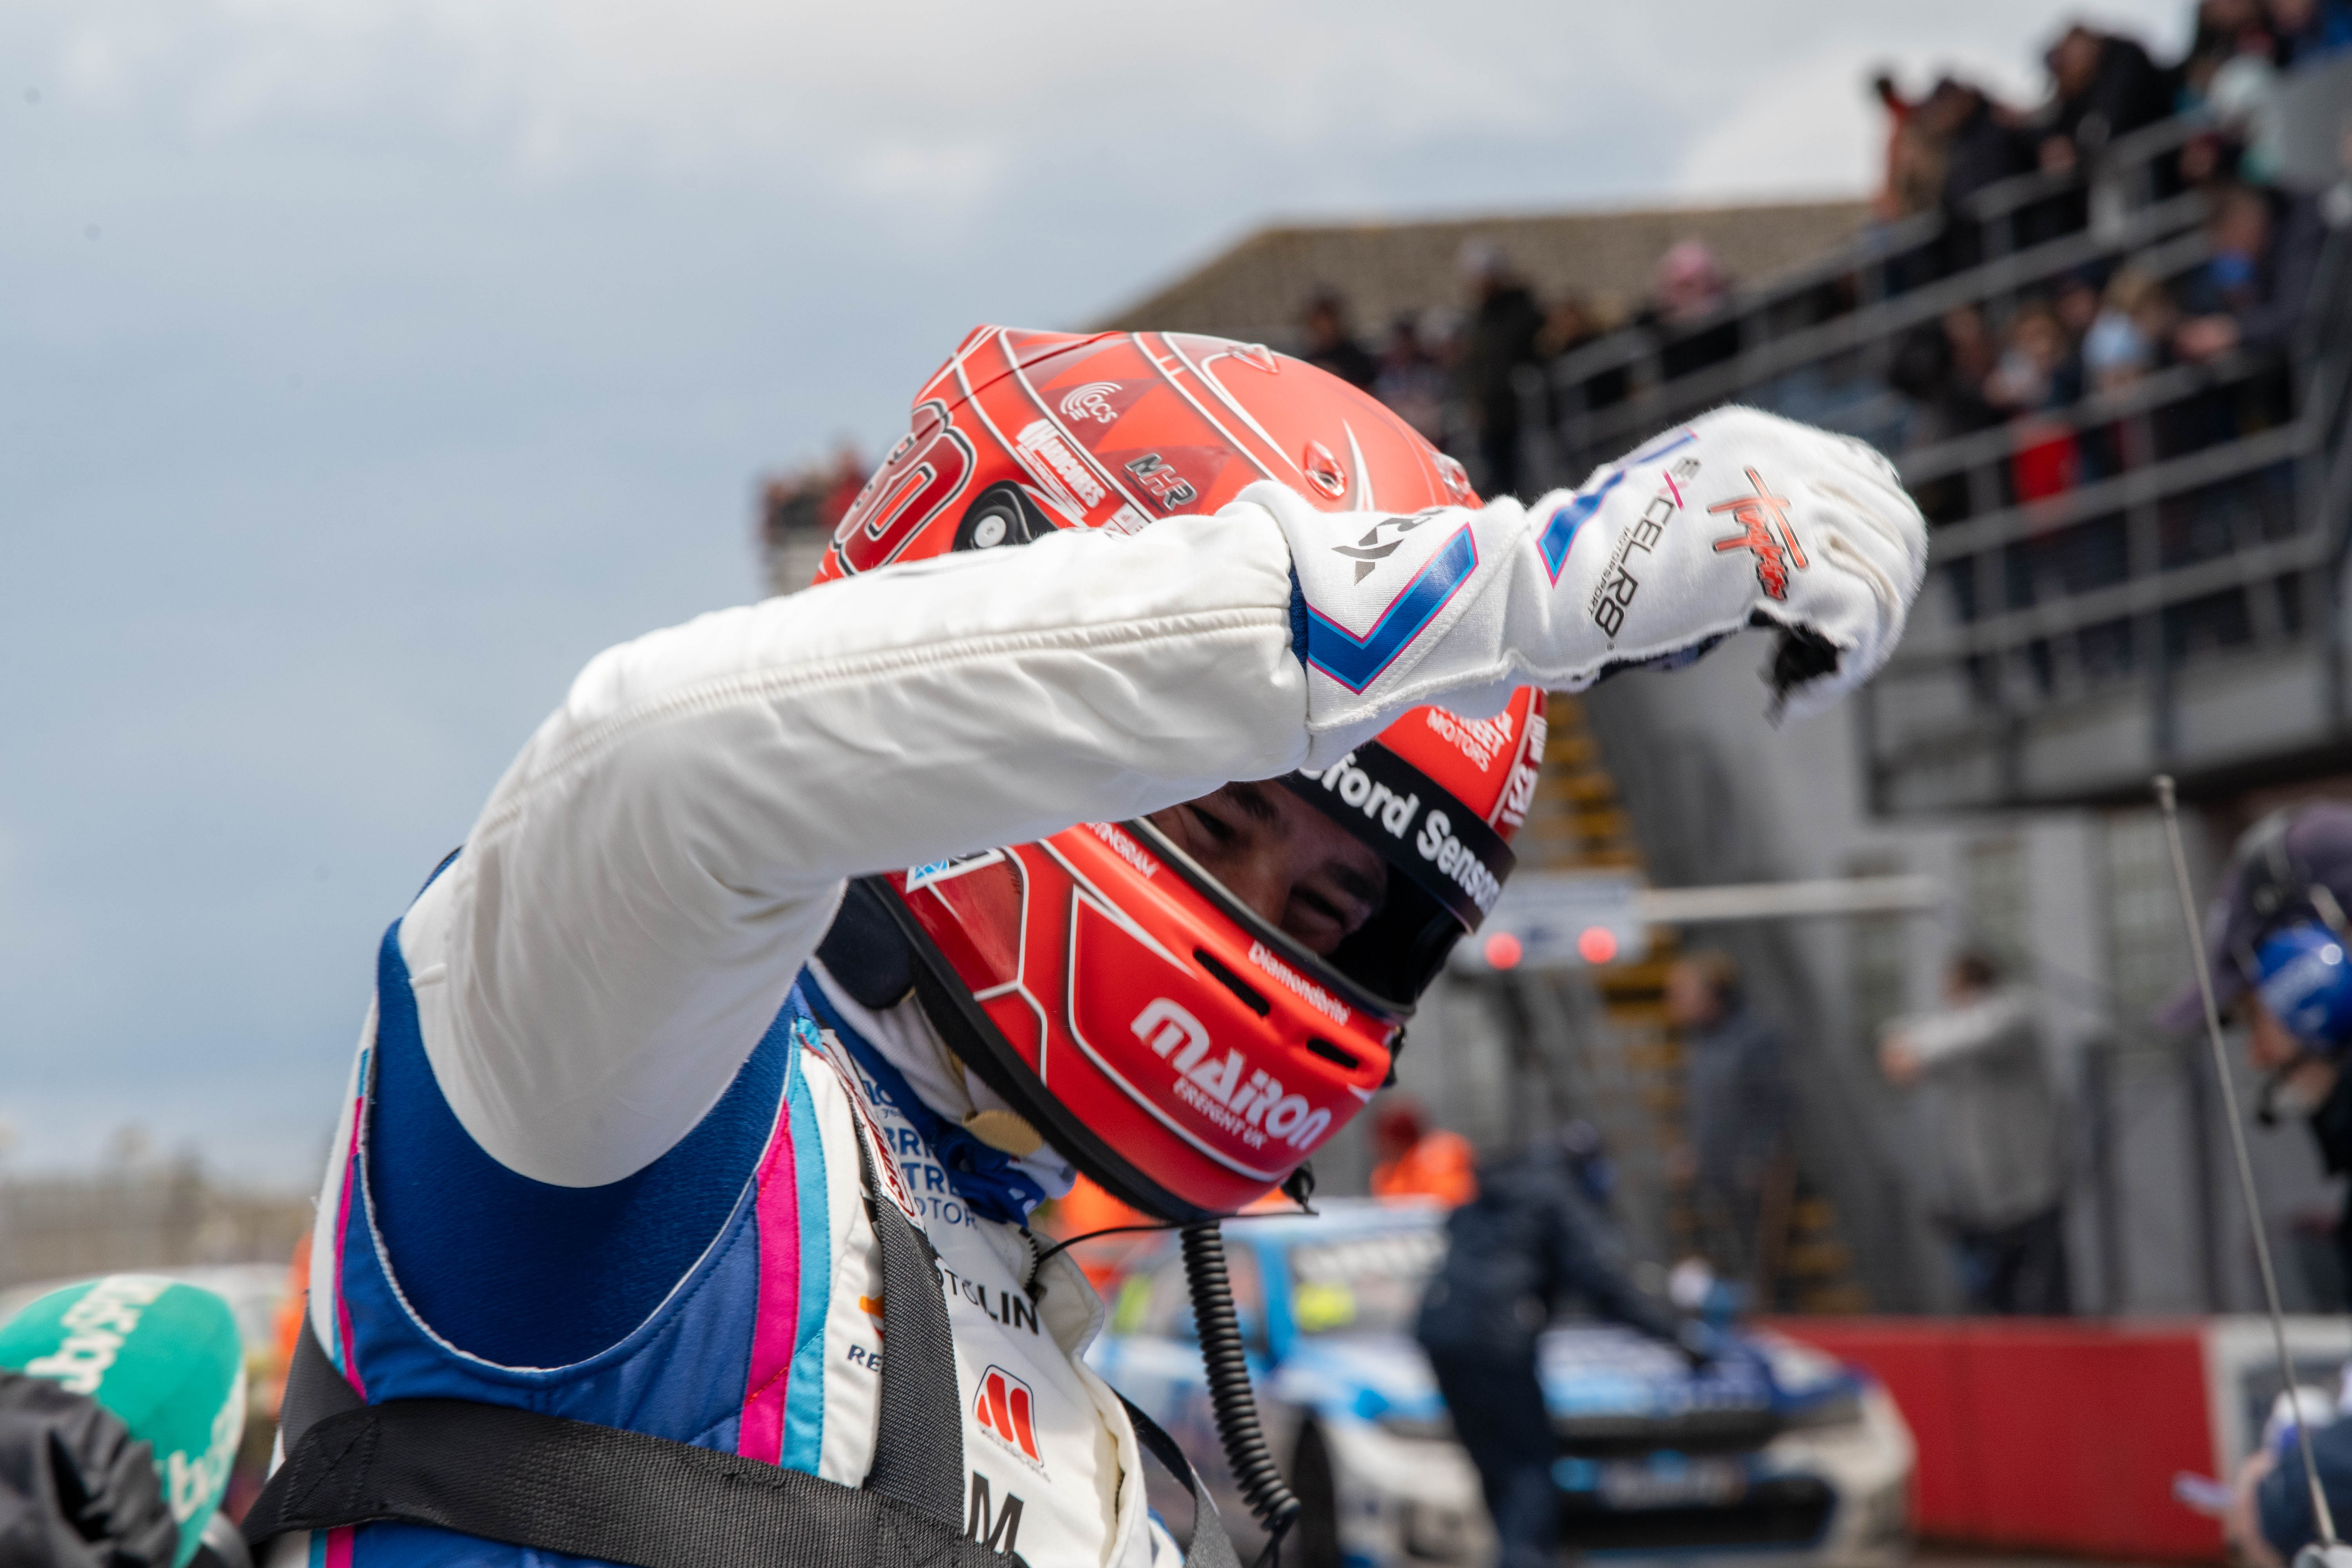 EXCELR8’s Tom Ingram Clinches Victory in Dramatic BTCC Opener at Donington Park